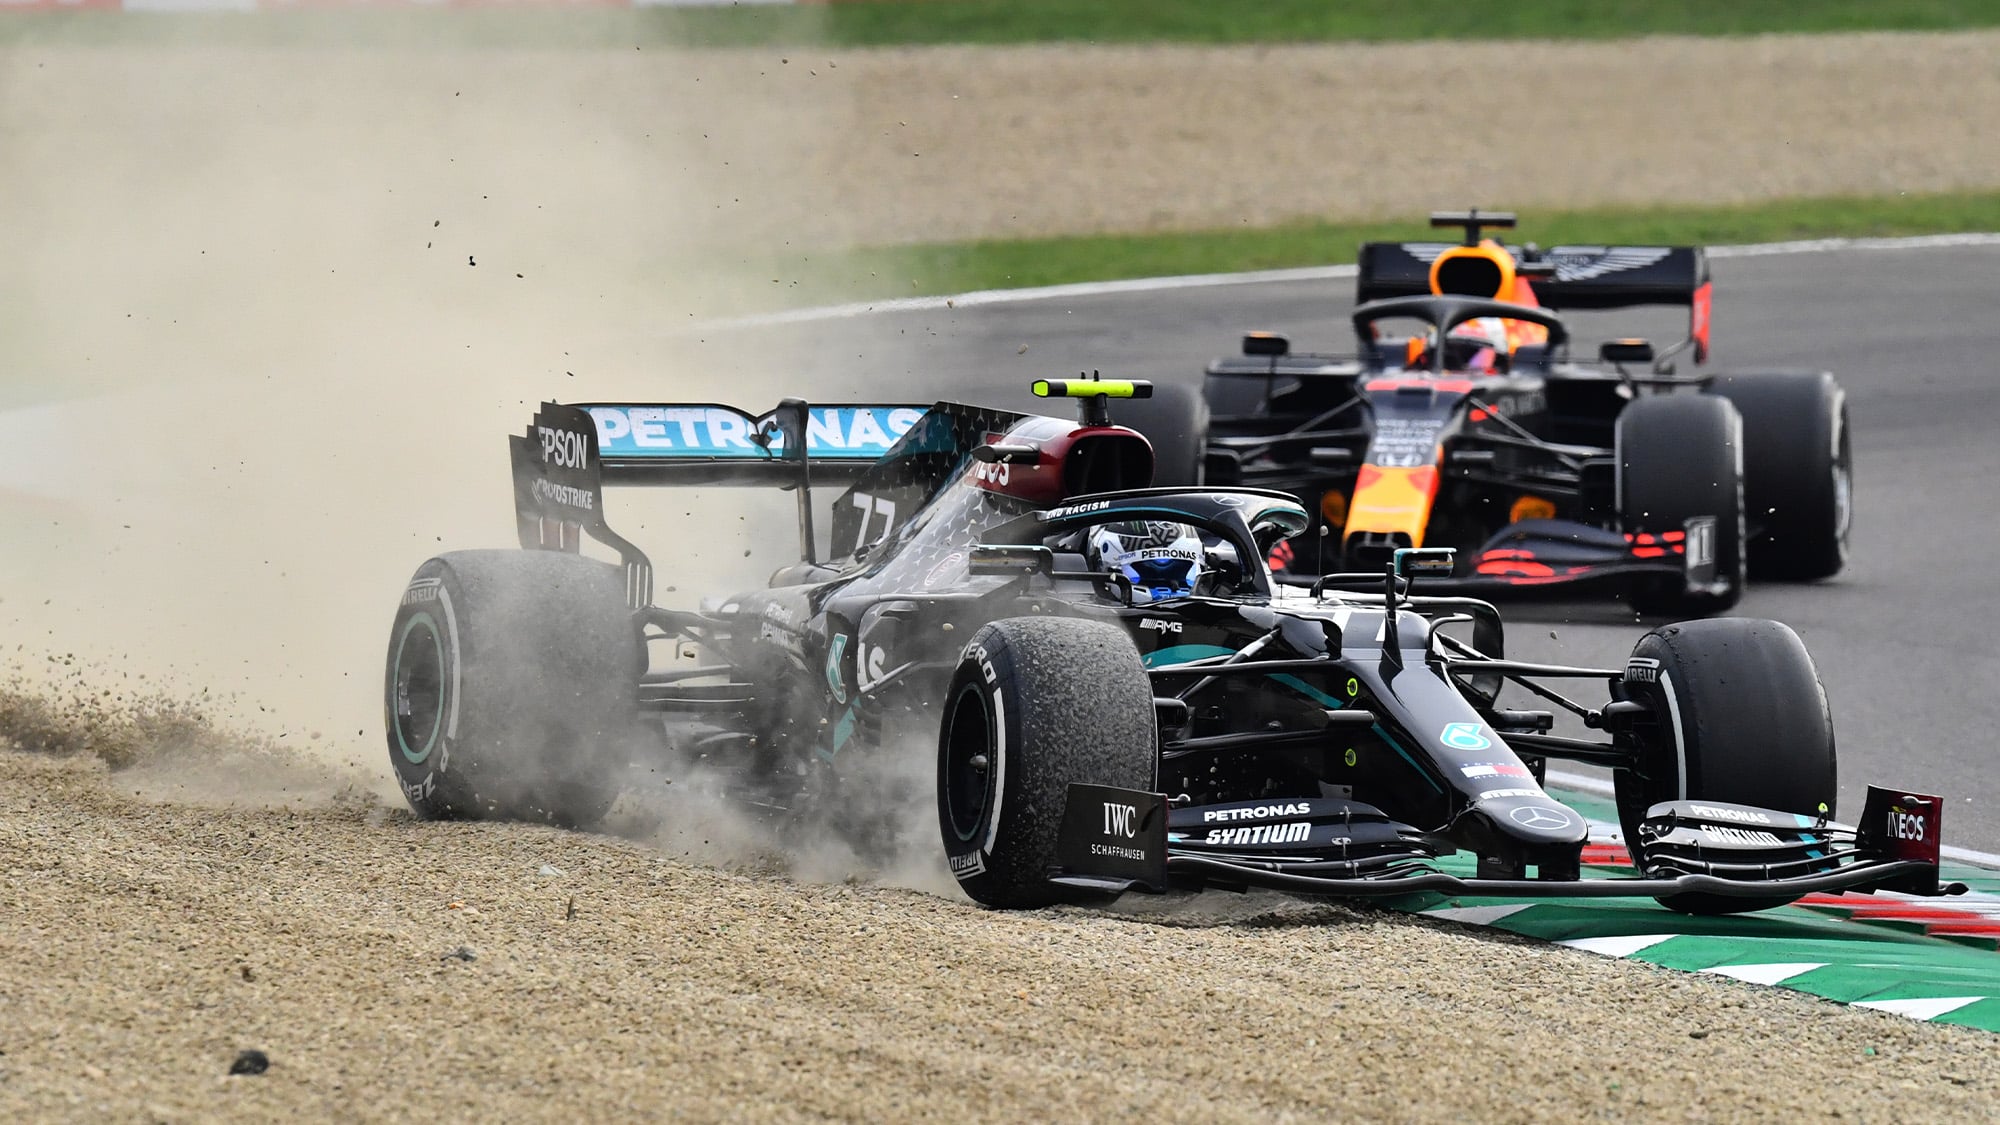 MPH Bottas looked unstoppable at Imola